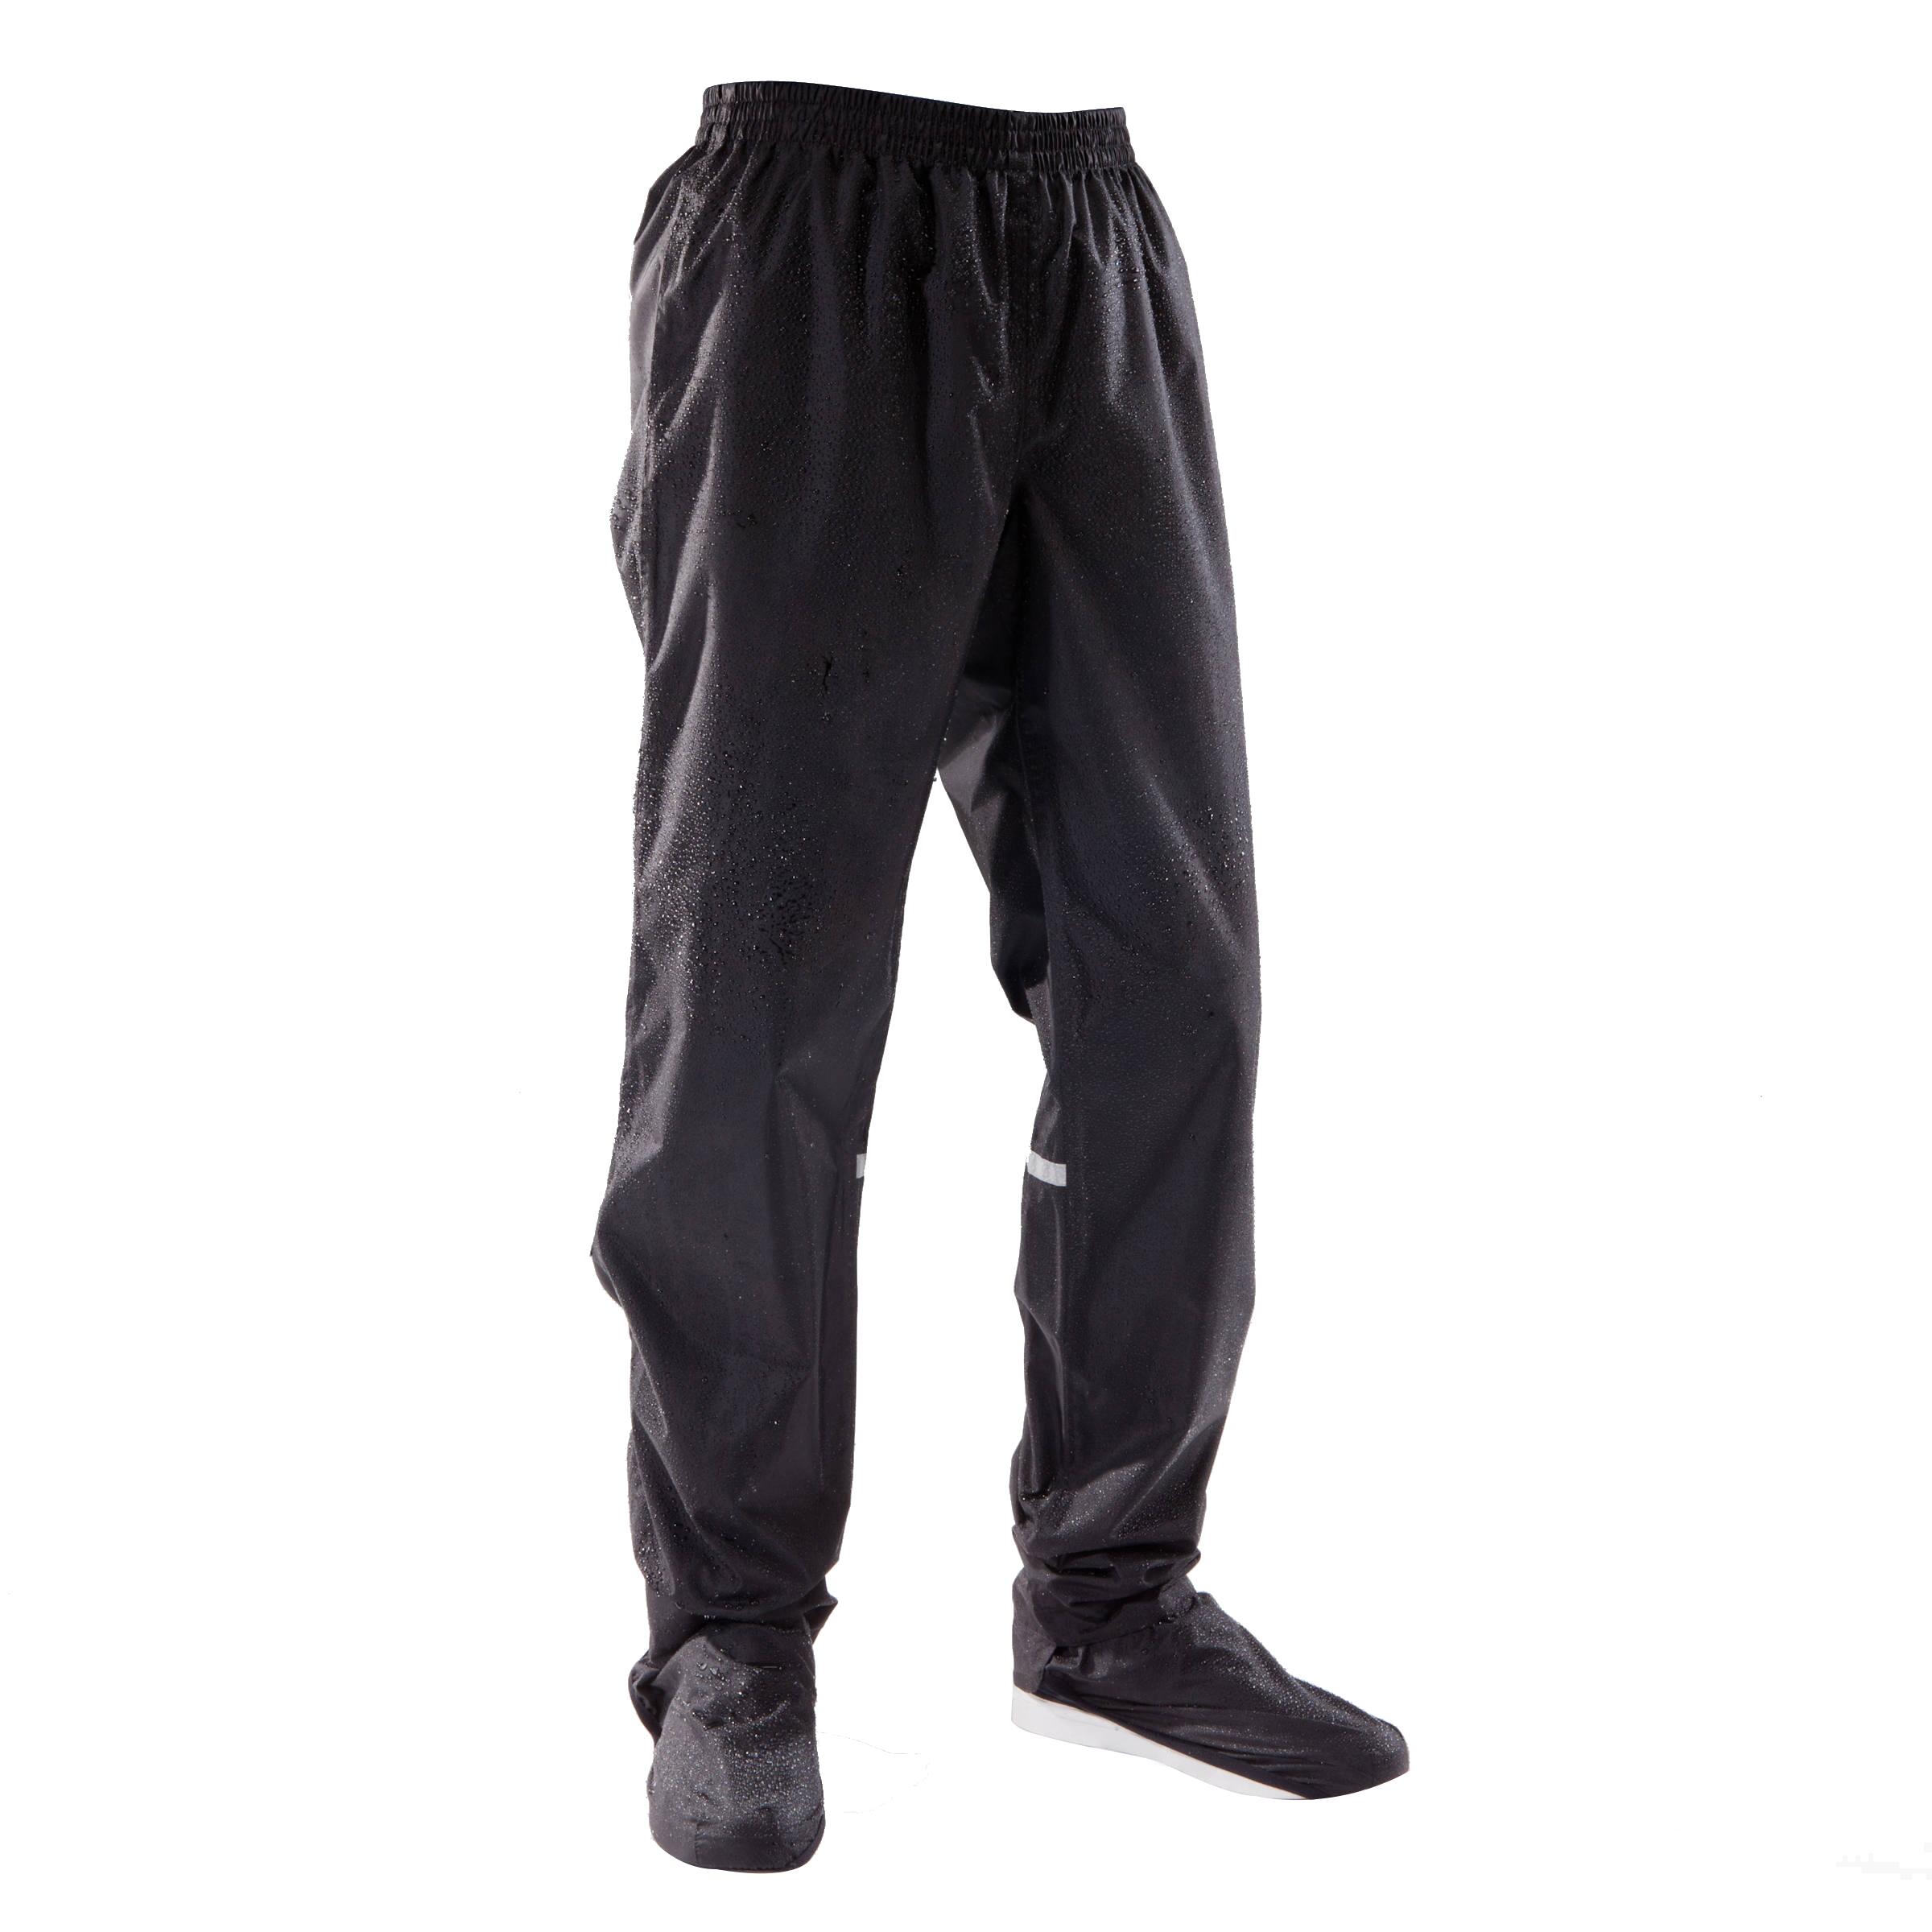 Quechua Rain Pants for Rent  Trousers  Hiking Overtrousers  Rs 300